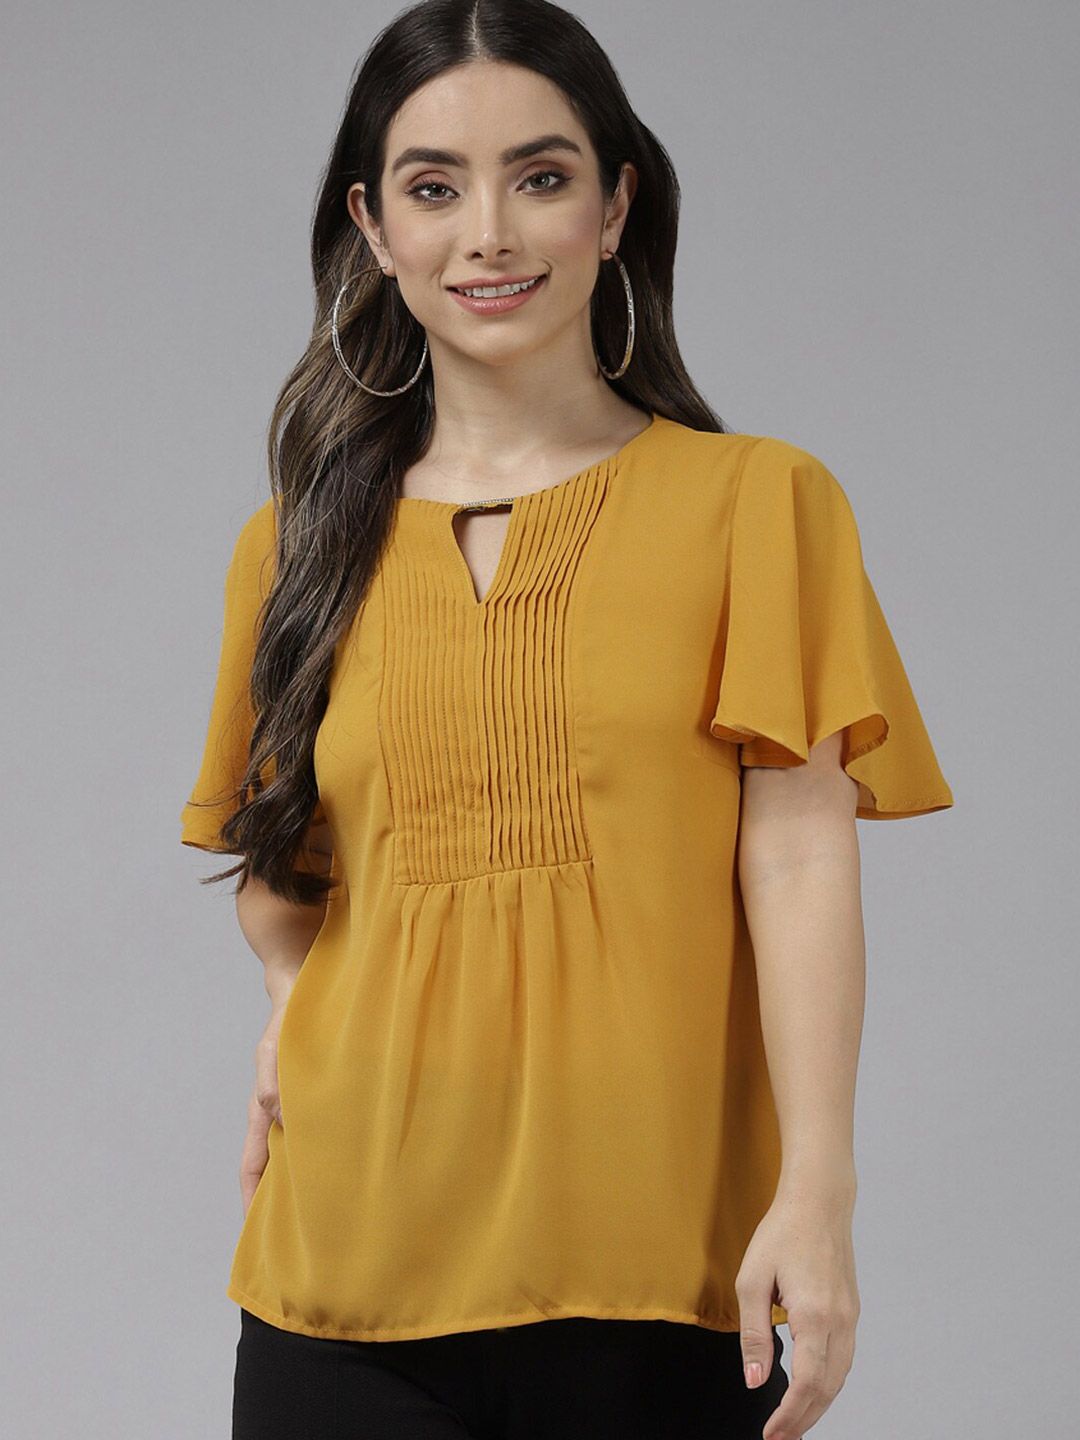 BAESD Keyhole Neck Flared Sleeves Top Price in India